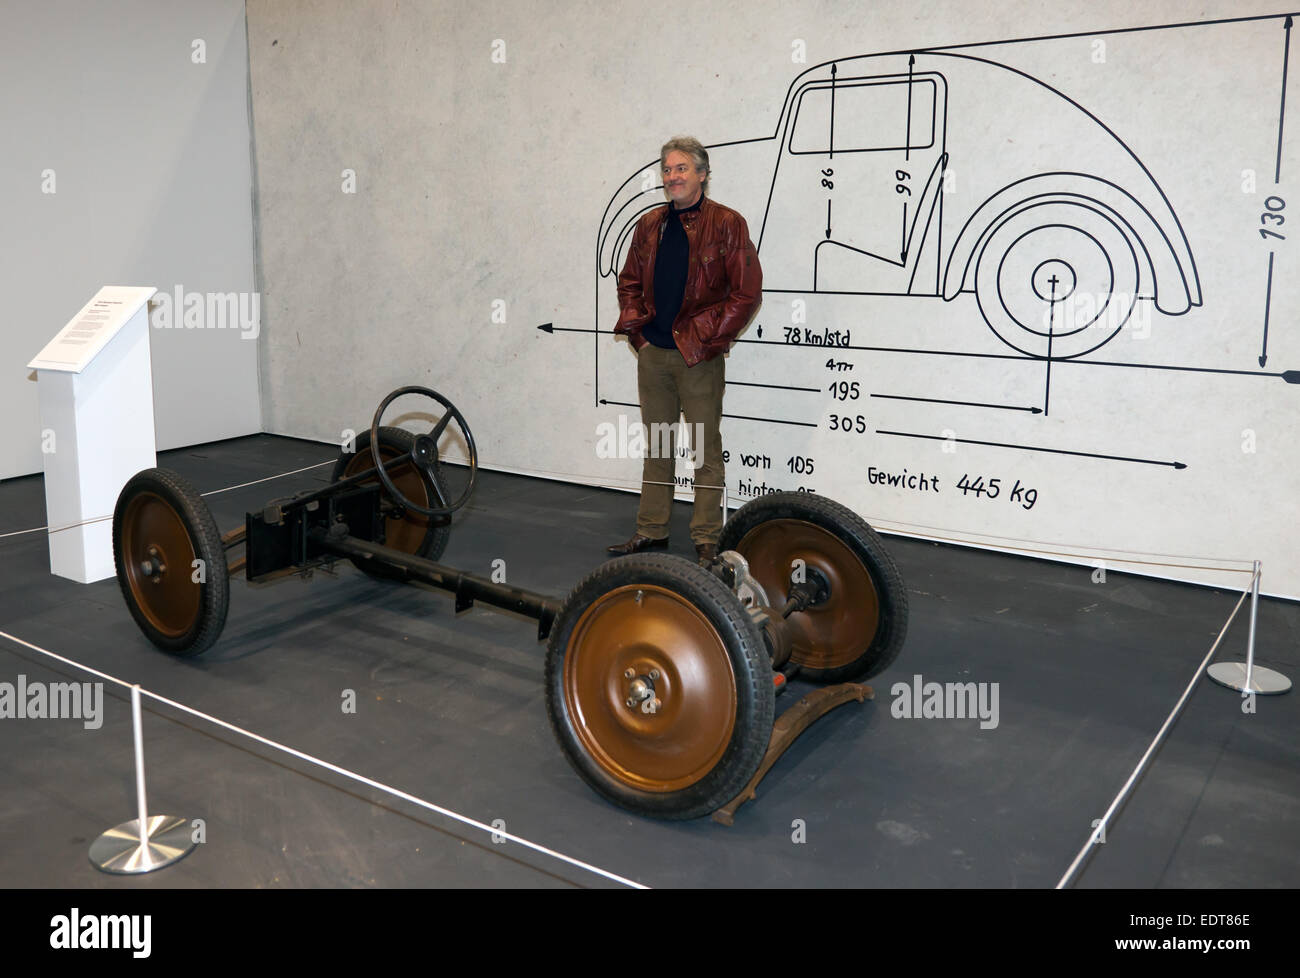 James May,  at the opening of his special exhibit,  at the London  Classic Car Show. 'Cars that Changed the World'. James is posing  by the 1934 Standard Superior MkII Chassis designed by Josef Ganz and later used in the Volks Wagen Stock Photo